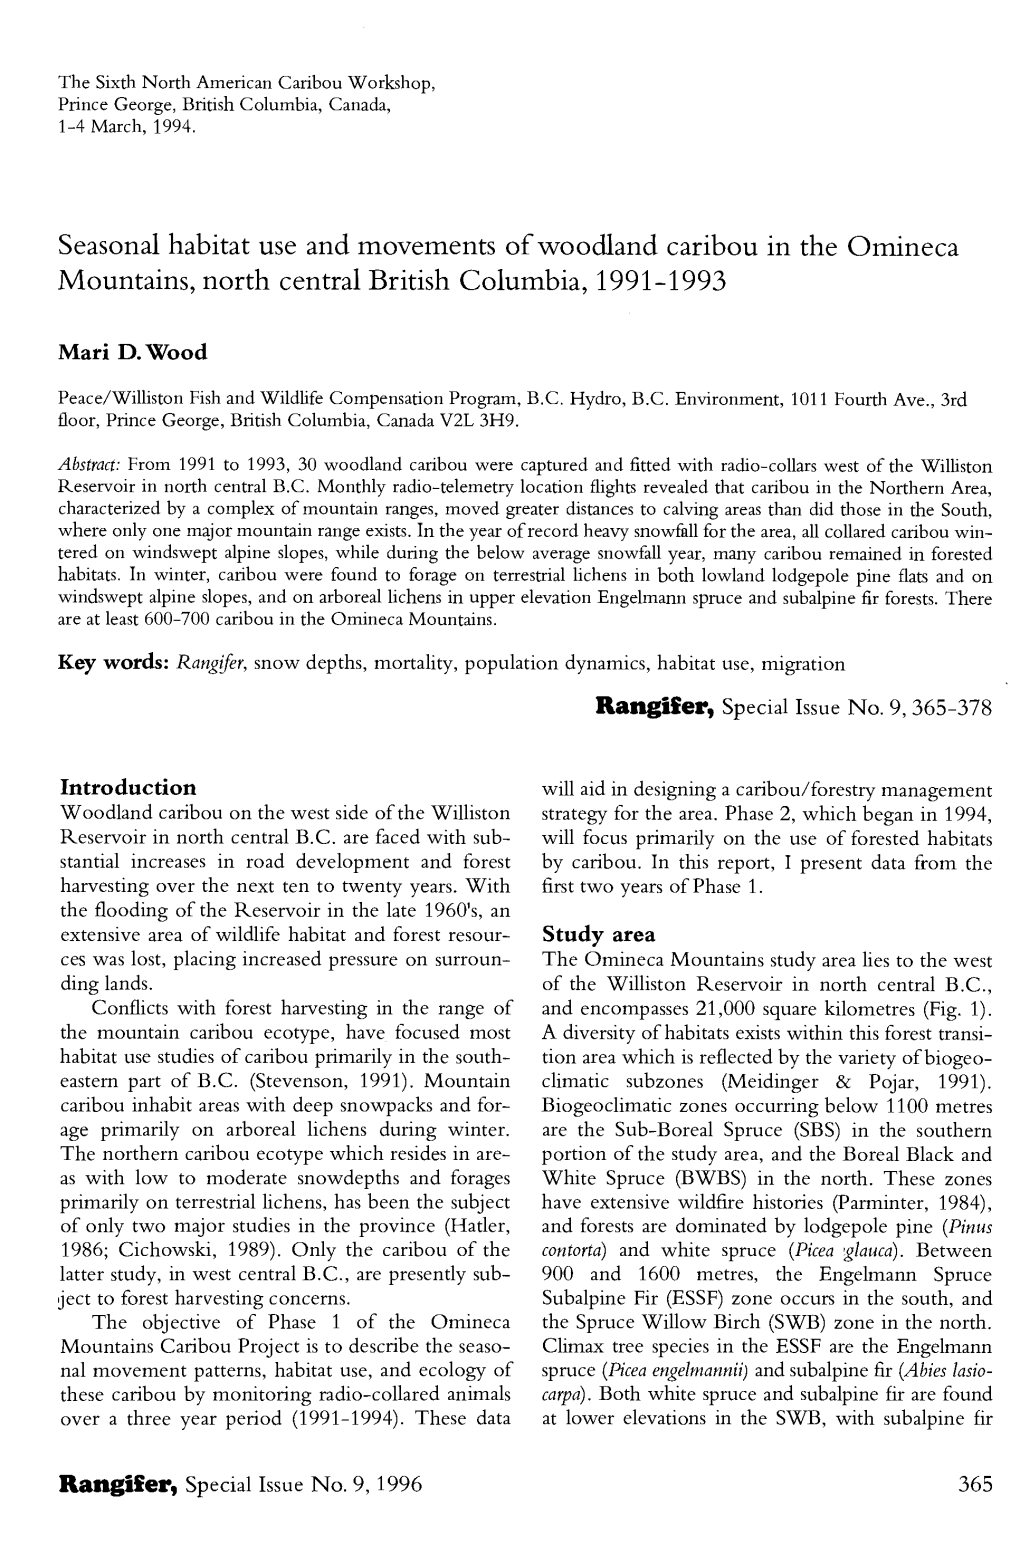 Seasonal Habitat Use and Movements of Woodland Caribou in the Omineca Mountains, North Central British Columbia, 1991-1993